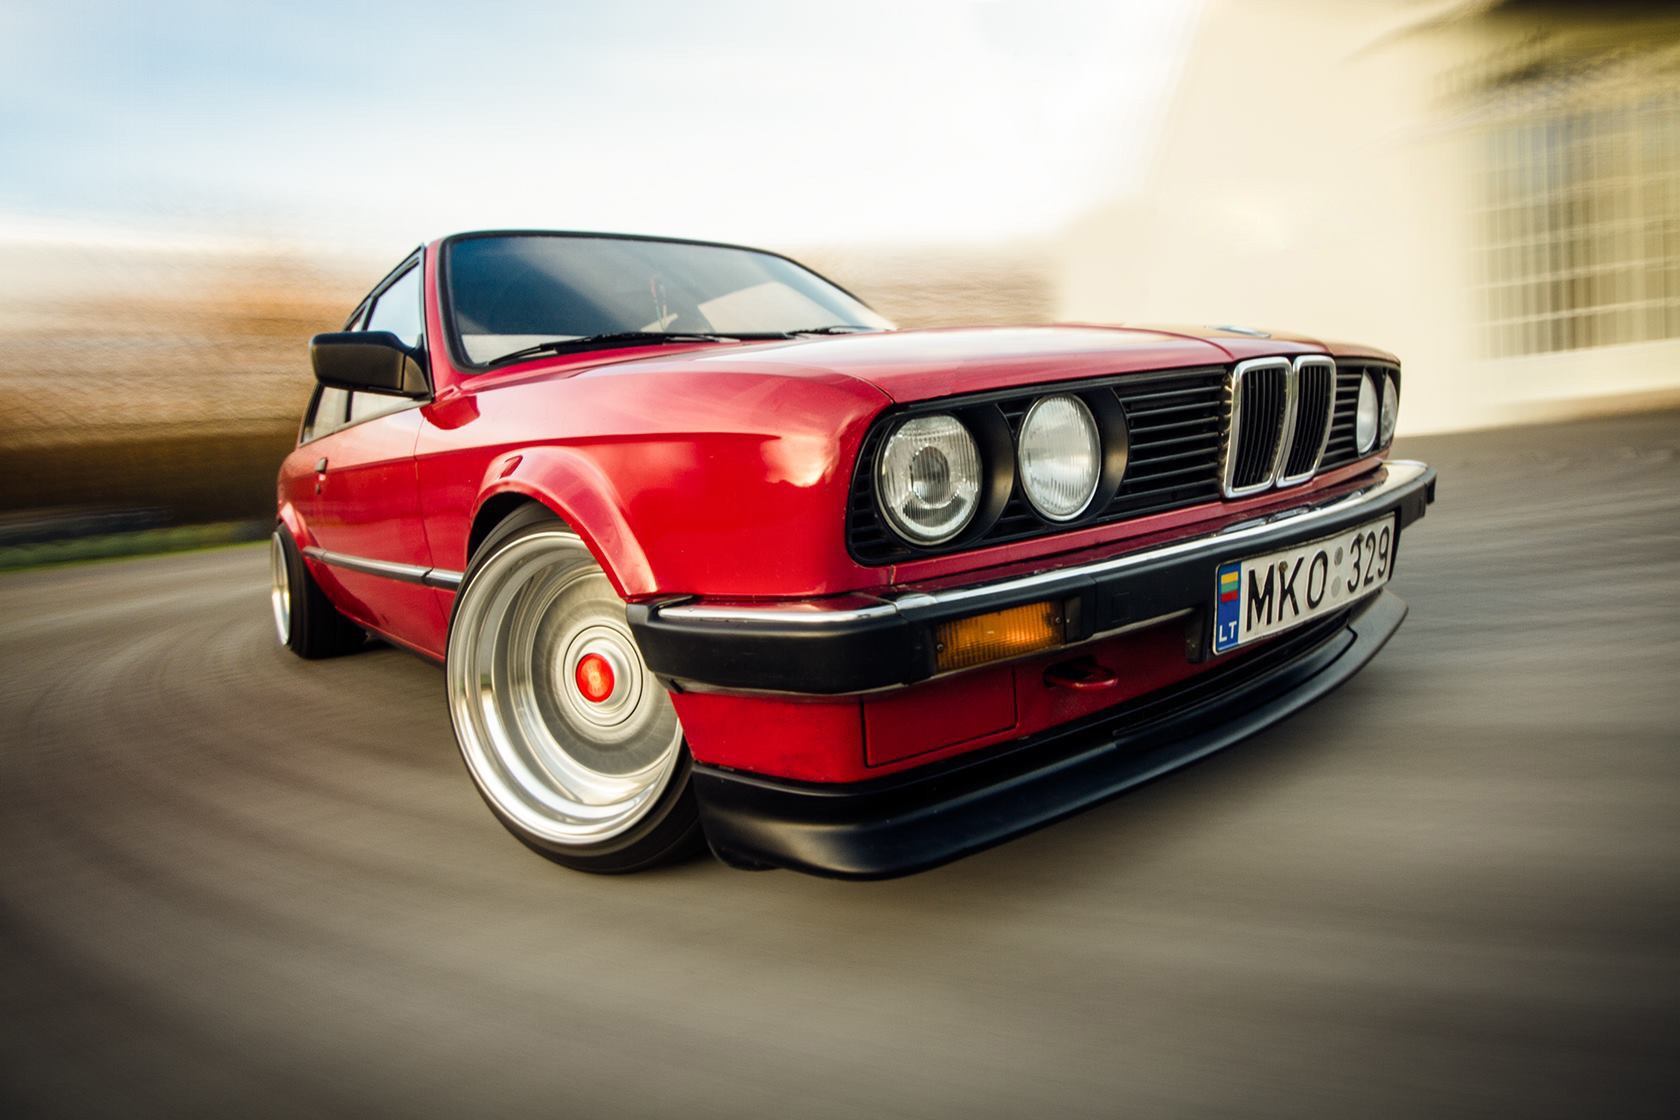 General 1680x1120 old car car sports car BMW BMW E30 motion blur red cars BBS BMW 3 Series vehicle numbers